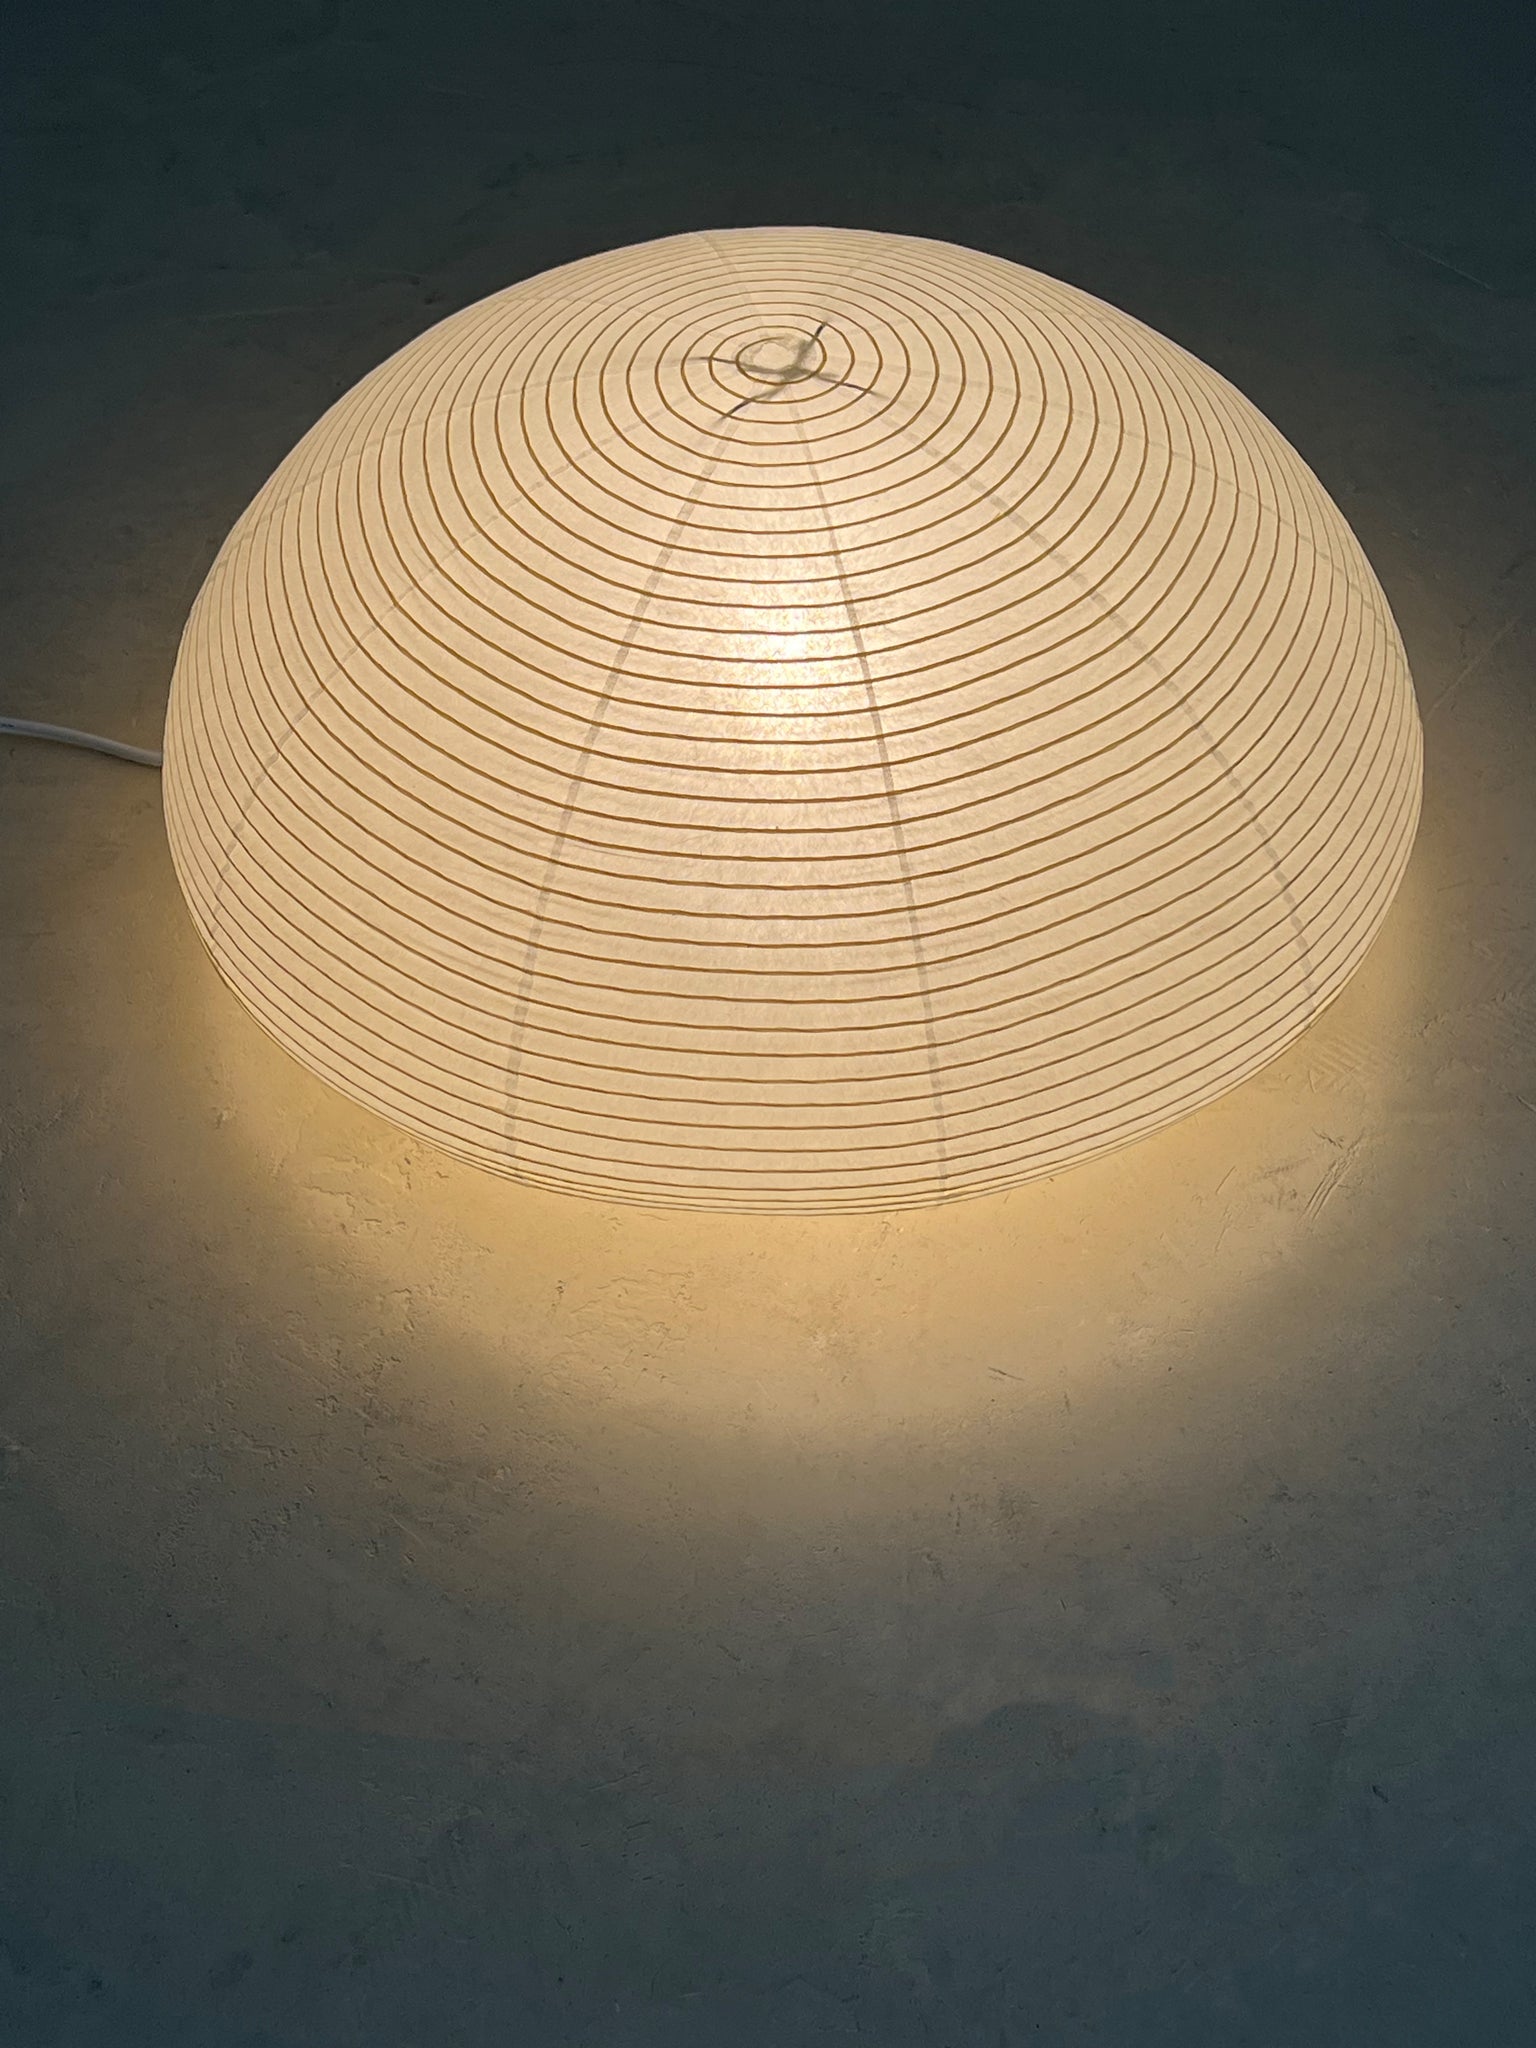 Japanese Paper Moon Dome Saucer Lamp